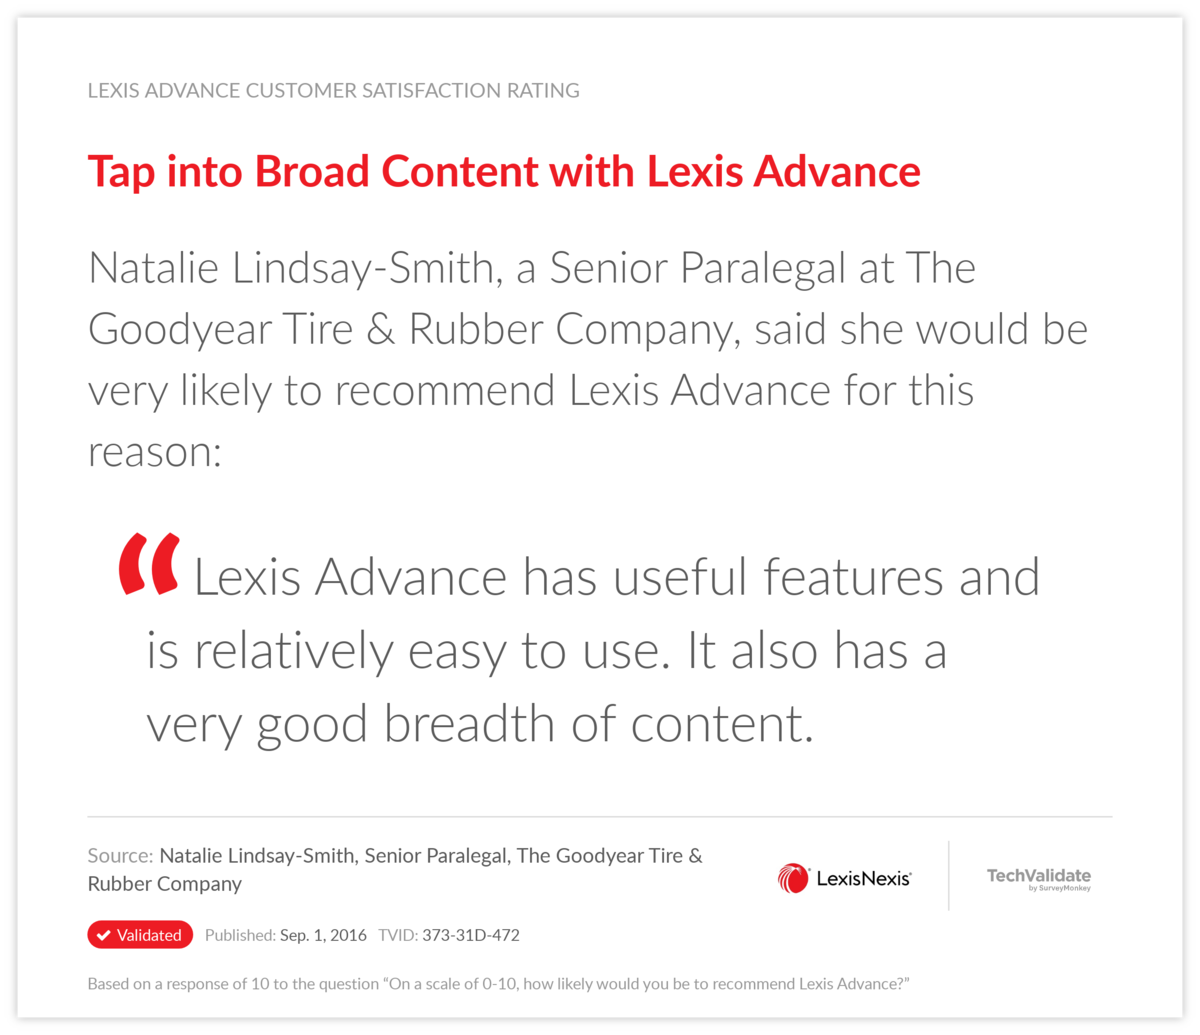 Tap into Broad Content with Lexis Advance